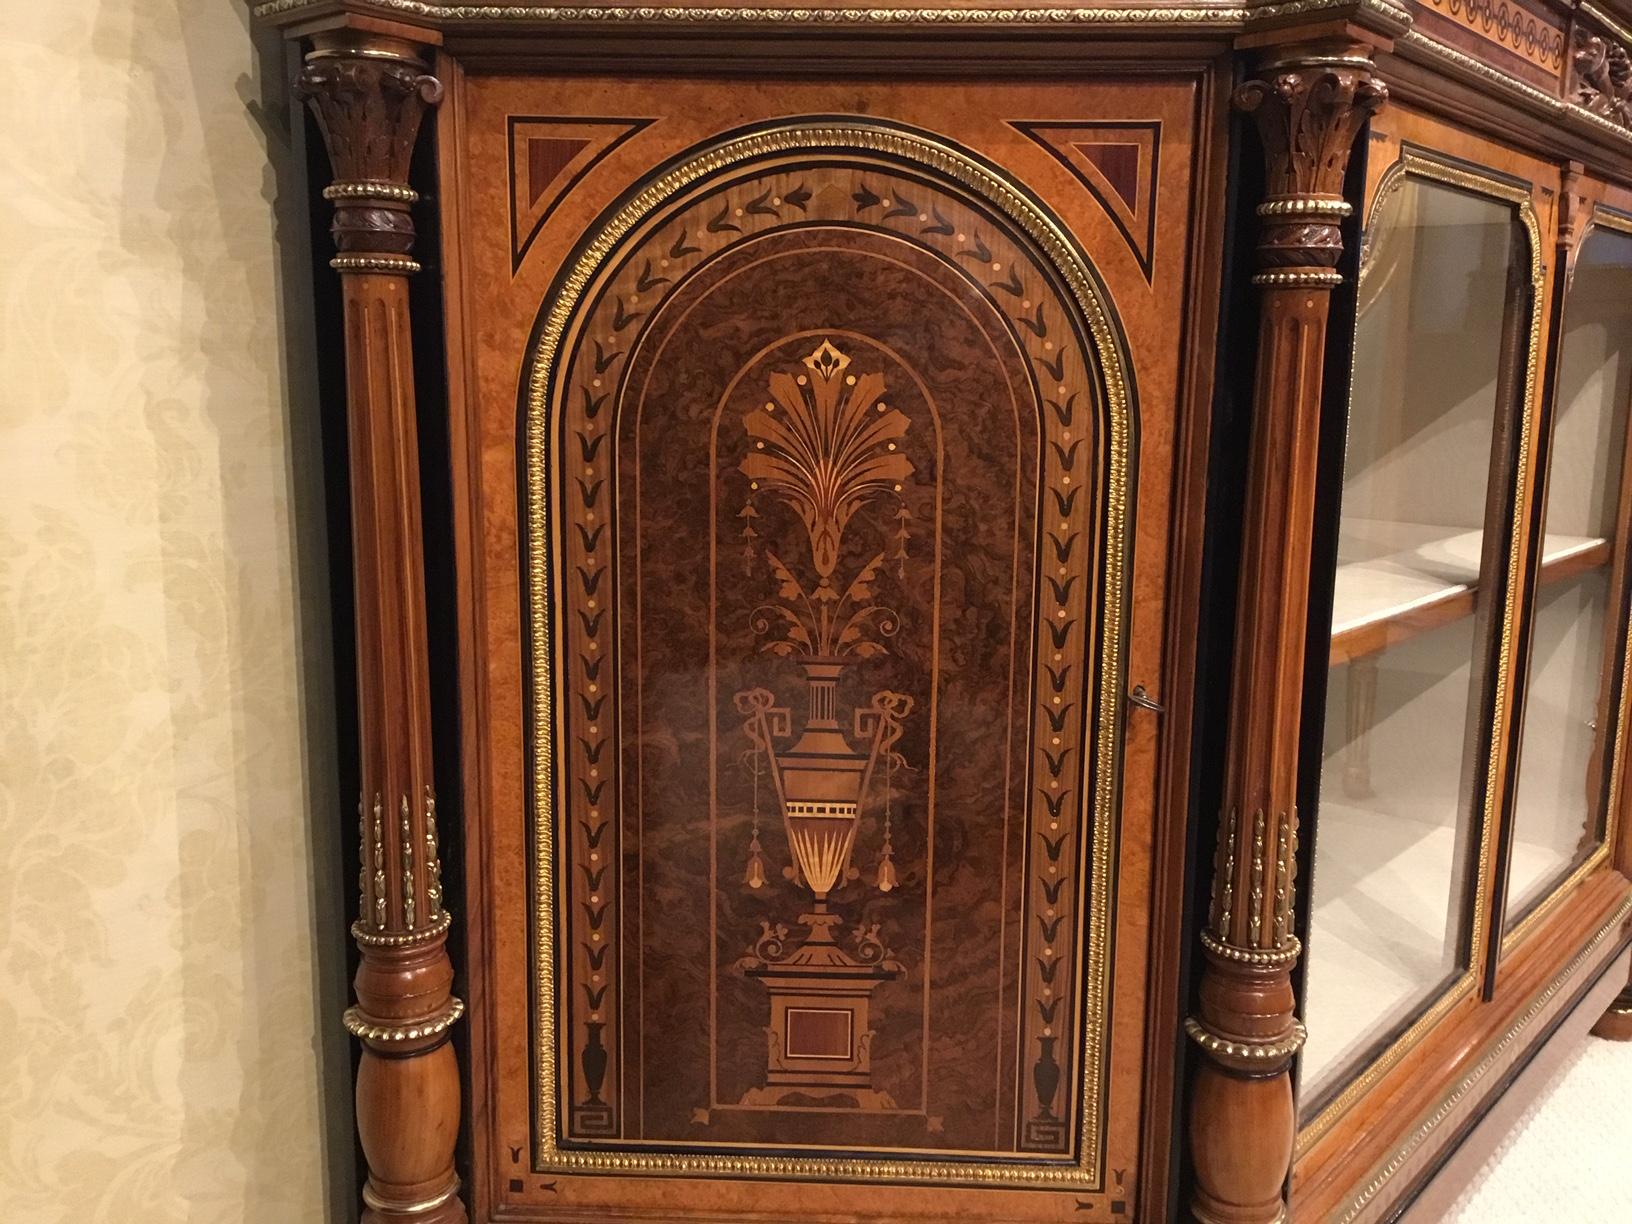 An exhibition quality Victorian period burr walnut, amboyna and ormolu side cabinet. Having a shaped top veneered in the finest burr walnut with amboyna and ebony banding and finely cast ormolu beading above an inlaid frieze with a central carved